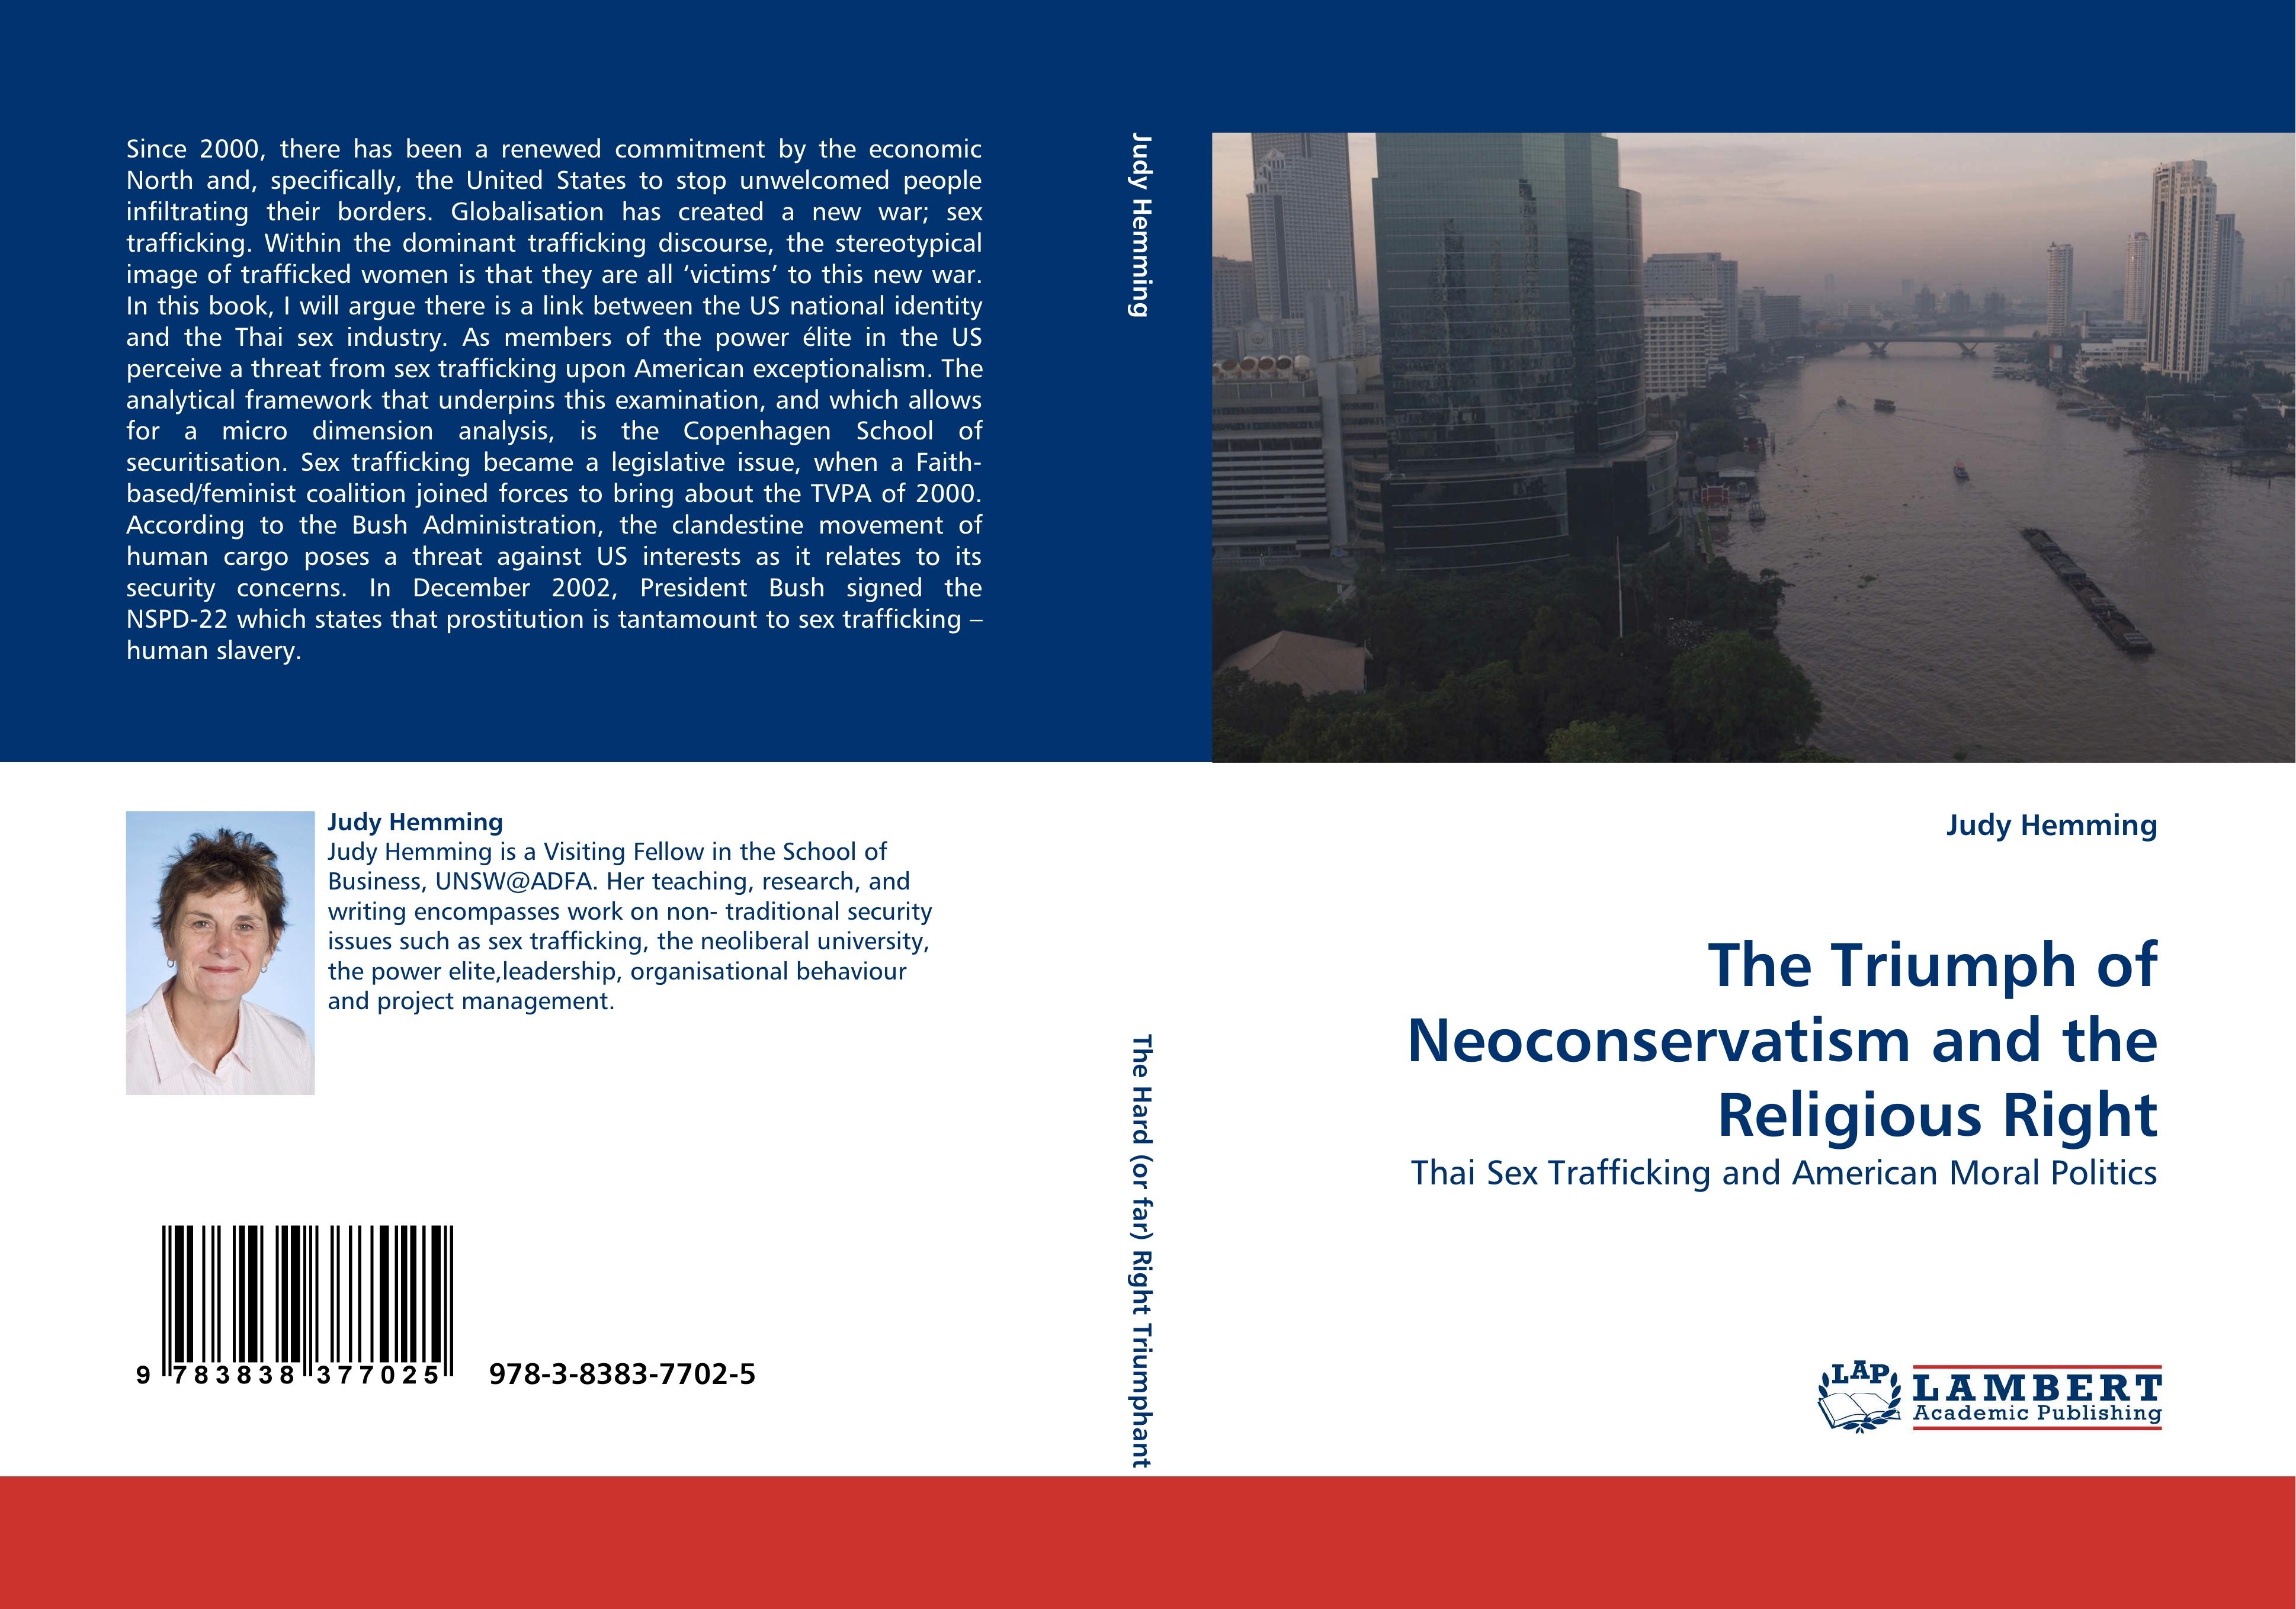 The Triumph of Neoconservatism and the Religious Right | Thai Sex Trafficking and American Moral Politics | Judy Hemming | Taschenbuch | Paperback | 304 S. | Englisch | 2010 | EAN 9783838377025 - Hemming, Judy